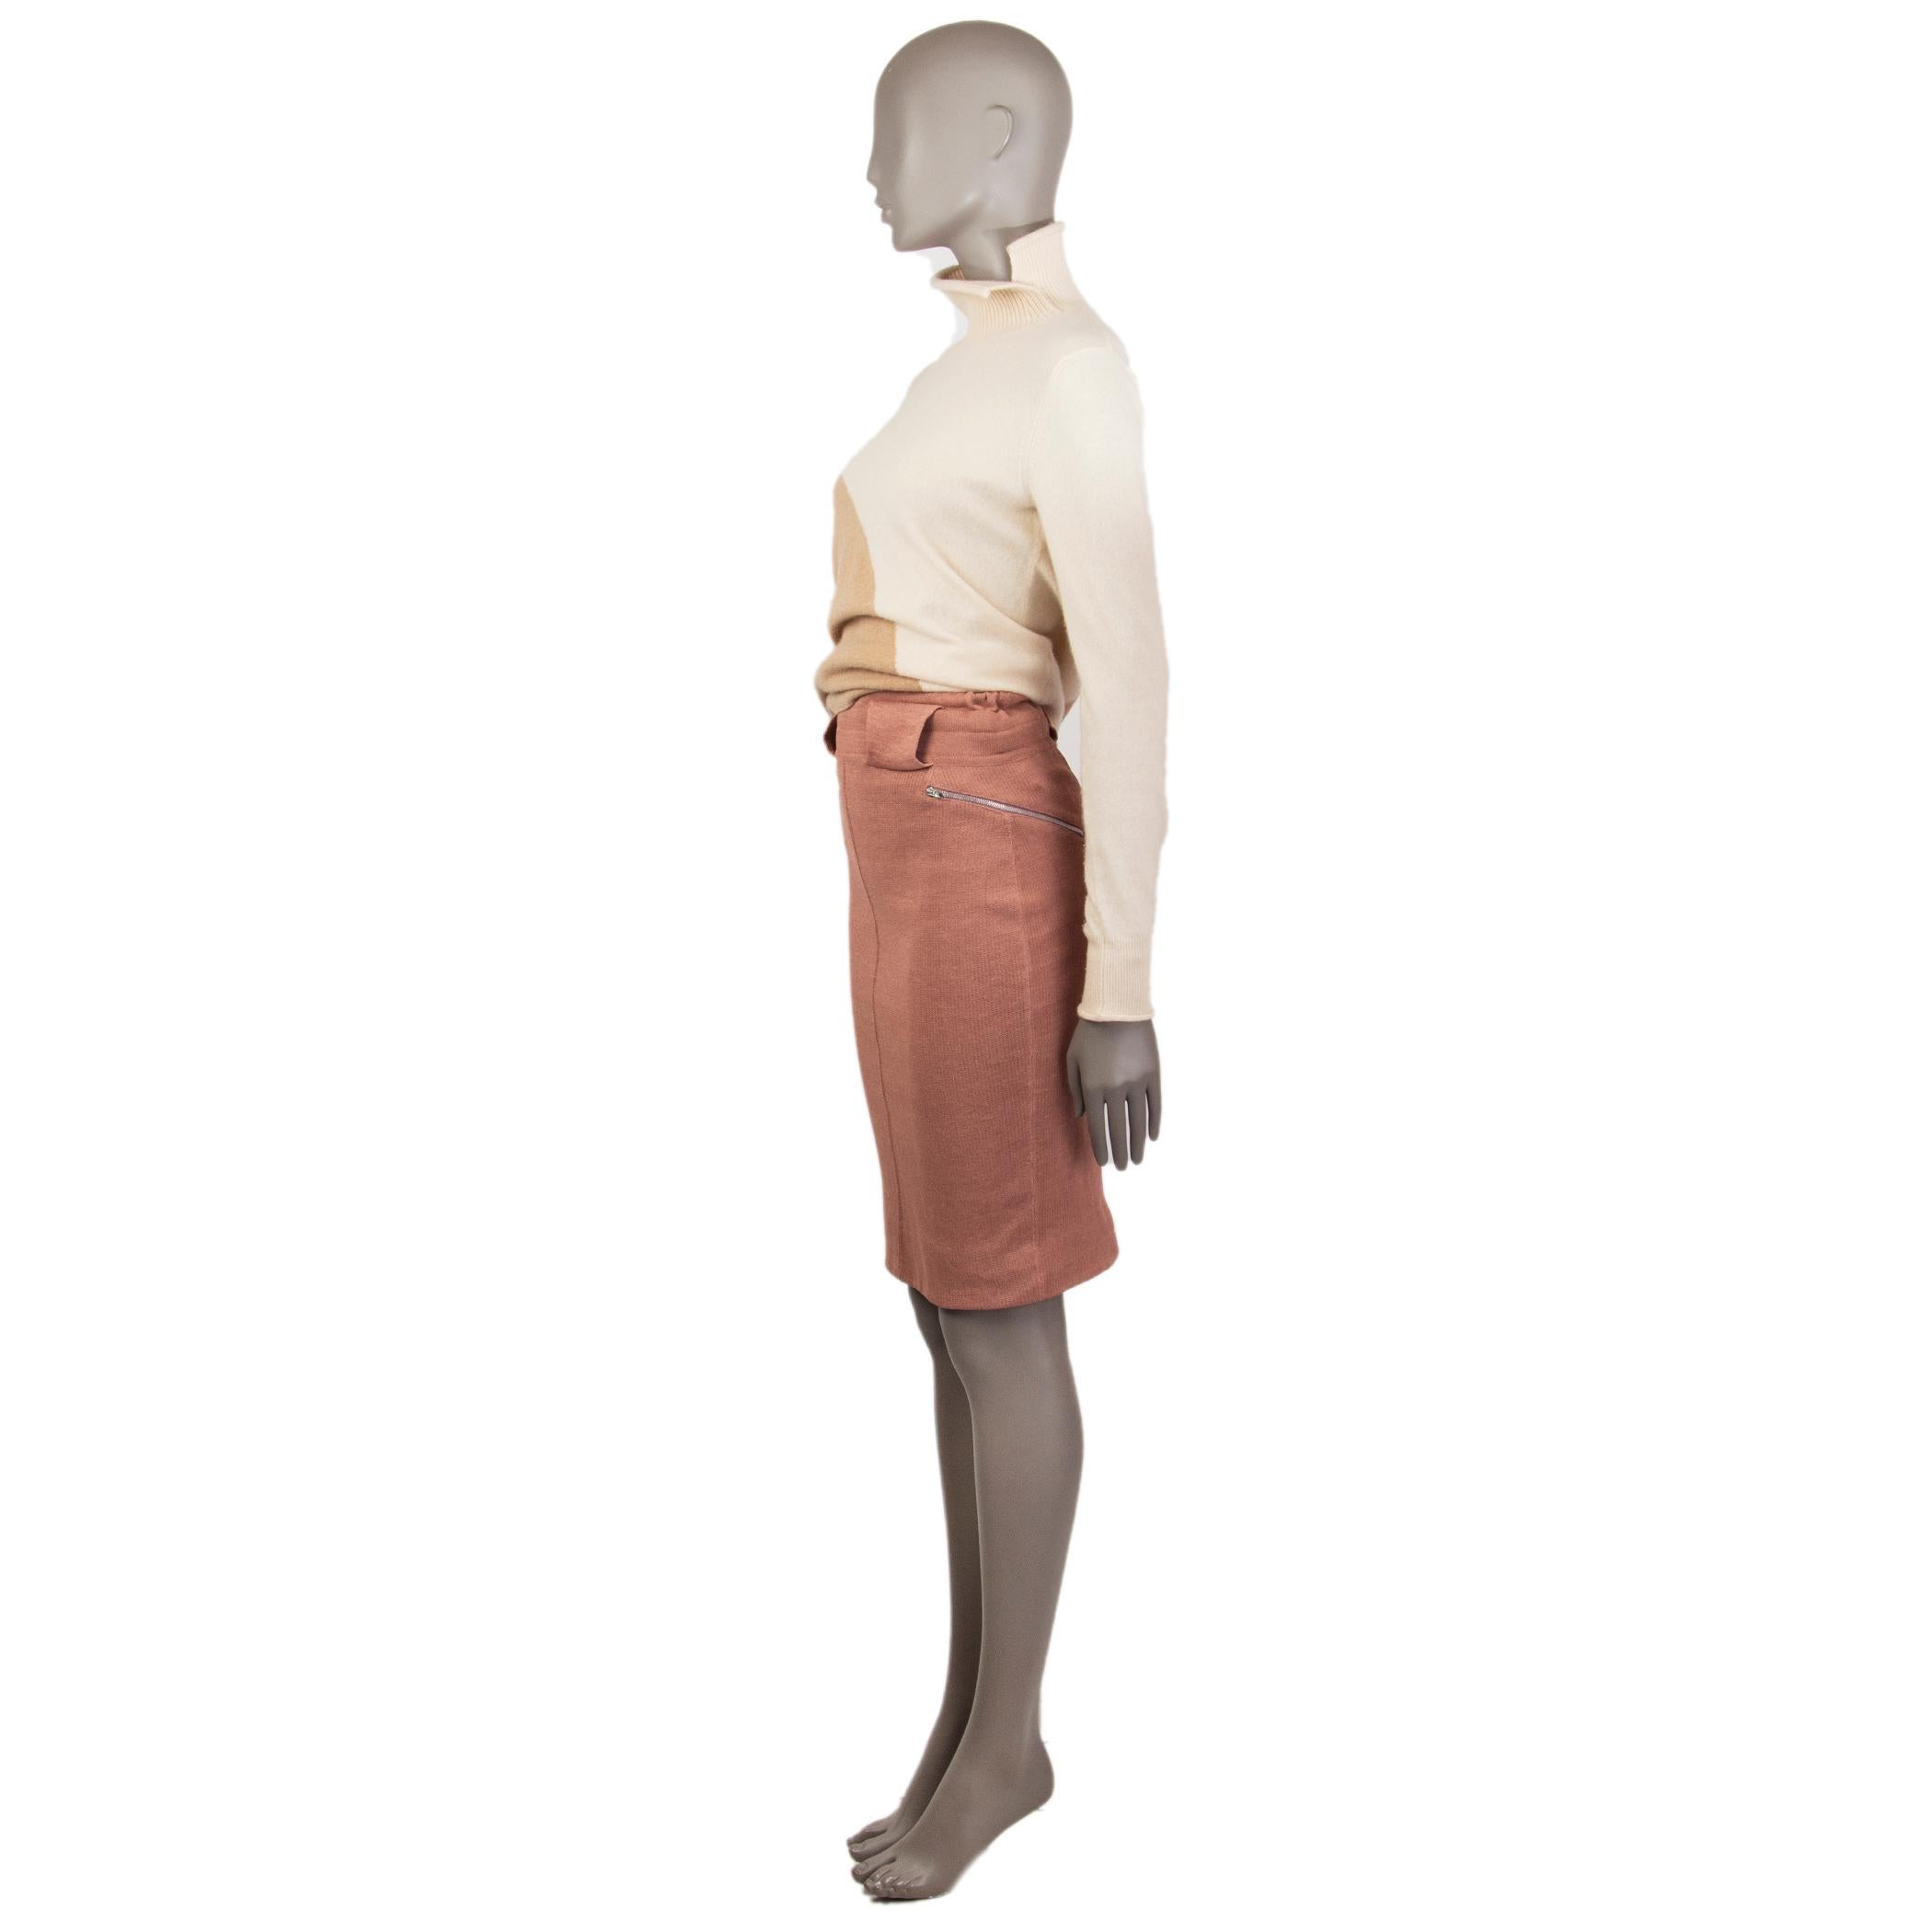 Alaia pencil skirt in light brick linen (72%) polyamide (28%) with an elastic band at the waist detailed with amplified belt loops, two zippers on the sides. Is a slip on skirt with a close-fitting. Has been worn and is in excellent condition.

Tag